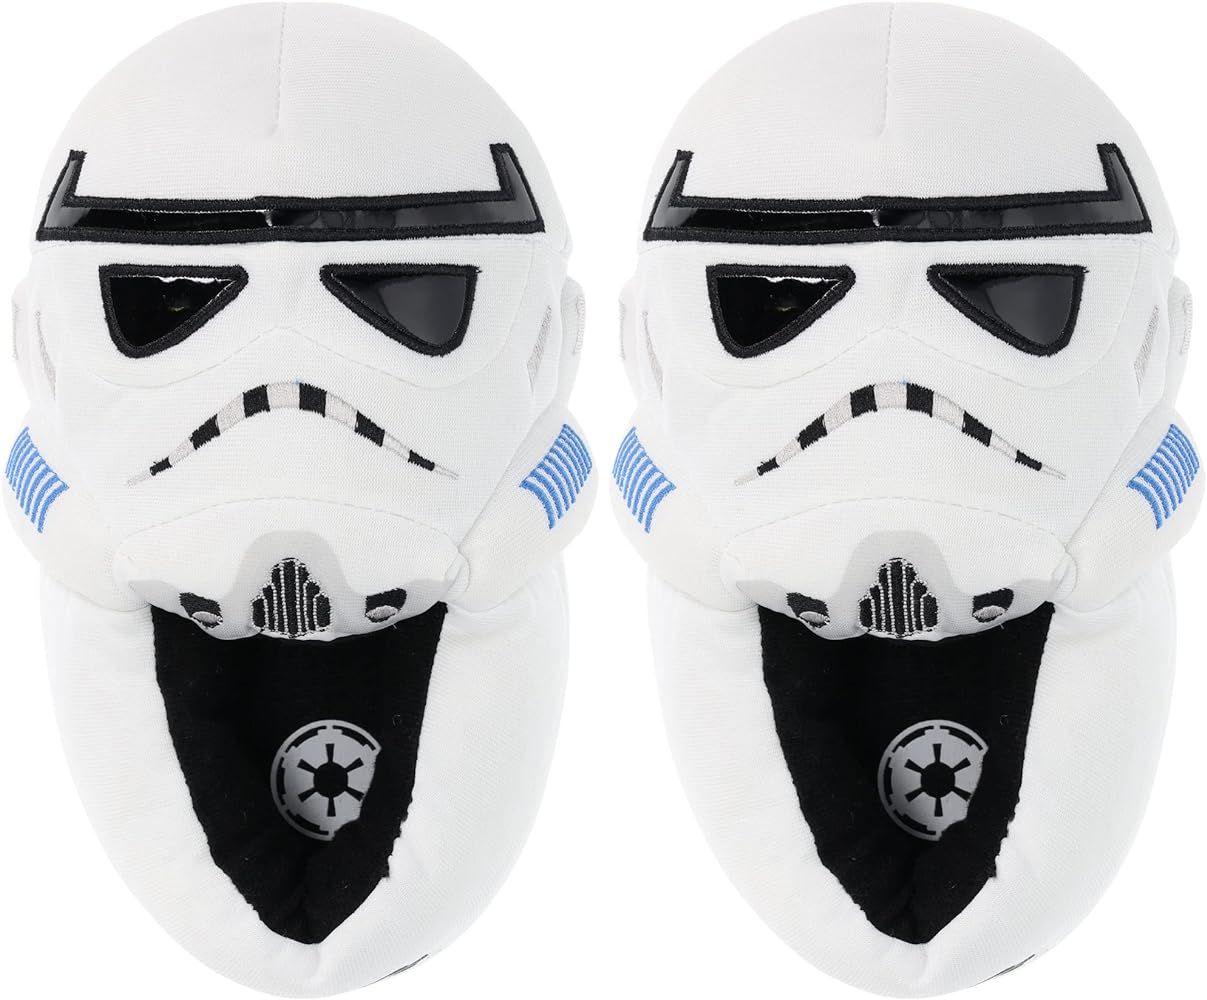 STAR WARS Slippers,Boba Fett, Darth Vader,Stormtrooper,Chewbacca,Kids and Adults | Amazon (US)